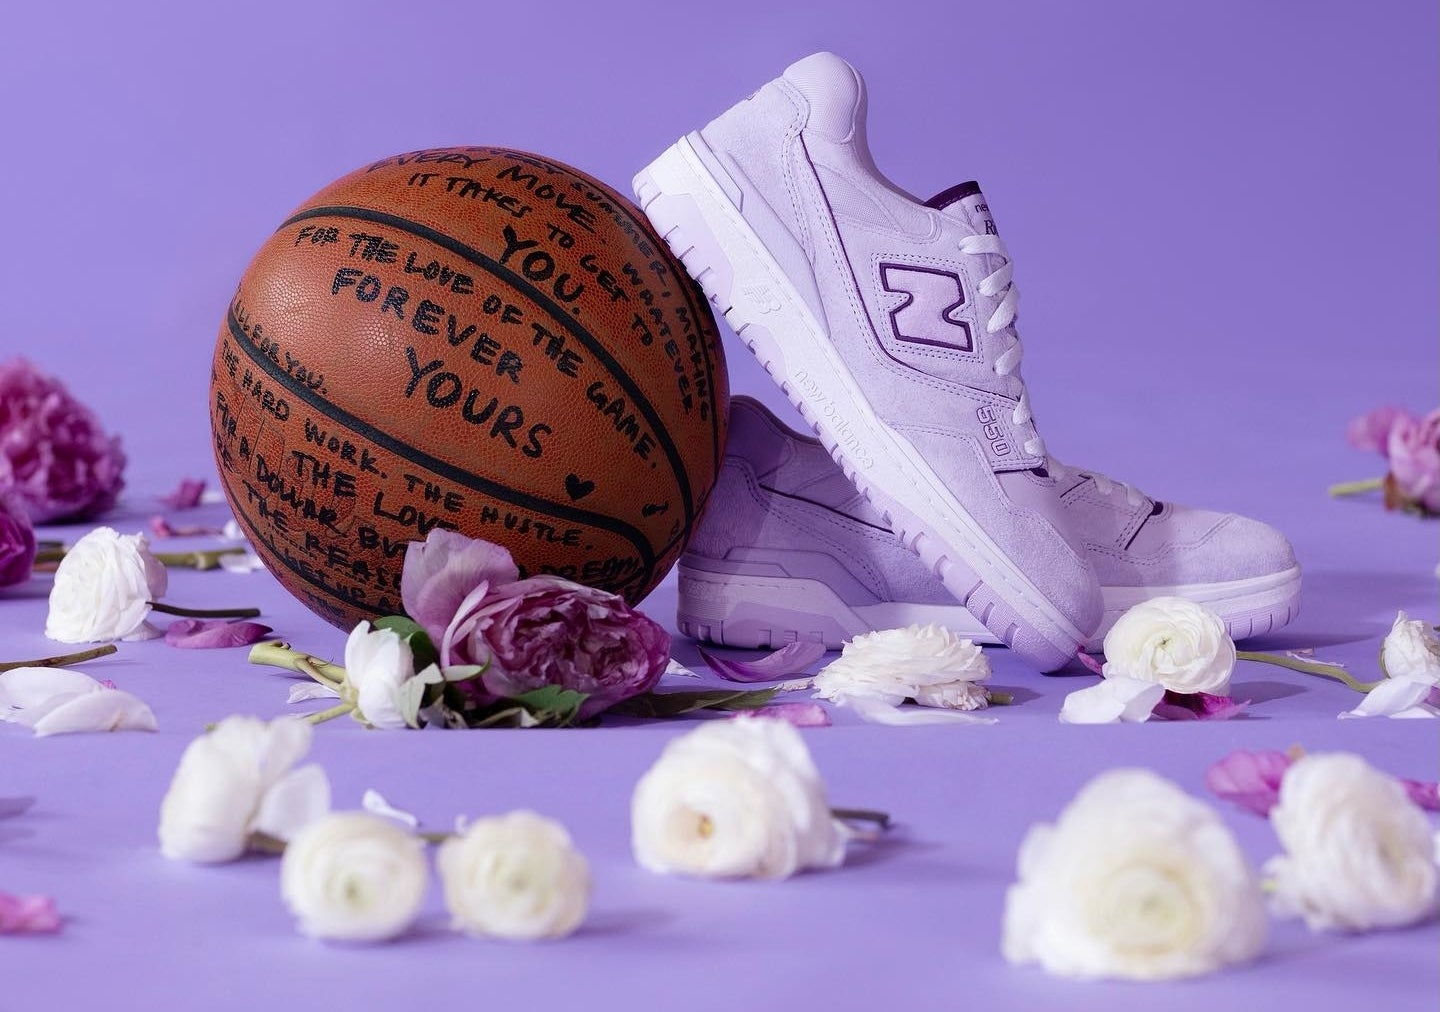 Rich Paul x New Balance 550 'Forever Yours' Release Date